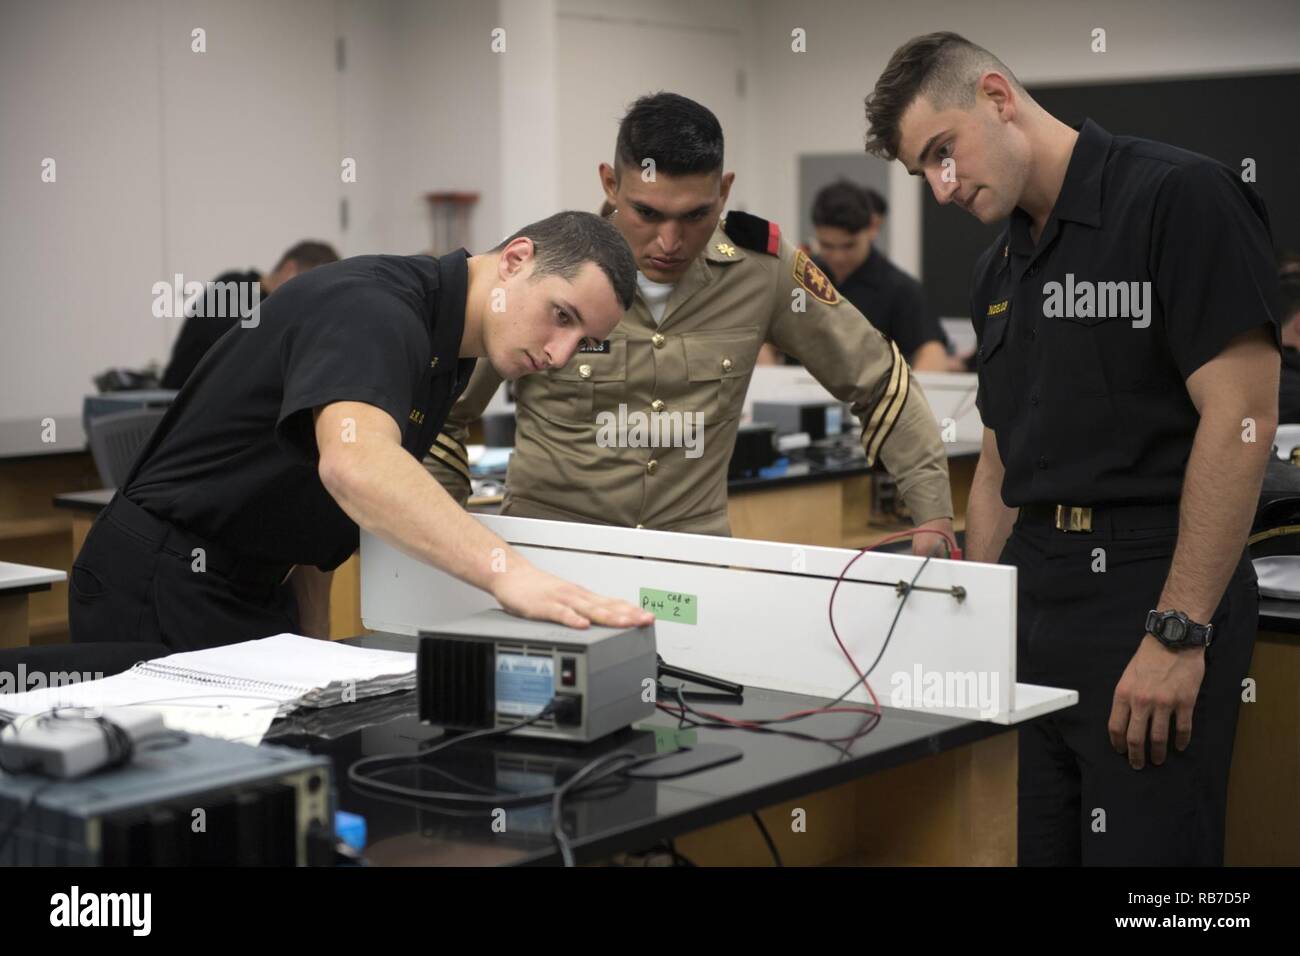 ANNAPOLIS, Md. (Dec. 2, 2016)  United States Naval Academy (USNA) Midshipman 3rd Class Cody Mendelow, Midshipman 3rd Class Gavin O’Donnell and Mexican Cadet Ricardo Fuentes work together to solve a physics equation. Cadets from Mexico's Military Academy, Heroico Colegio Militar, are visiting USNA to play an exhibition American-style football game with the USNA Sprint Football team. Stock Photo